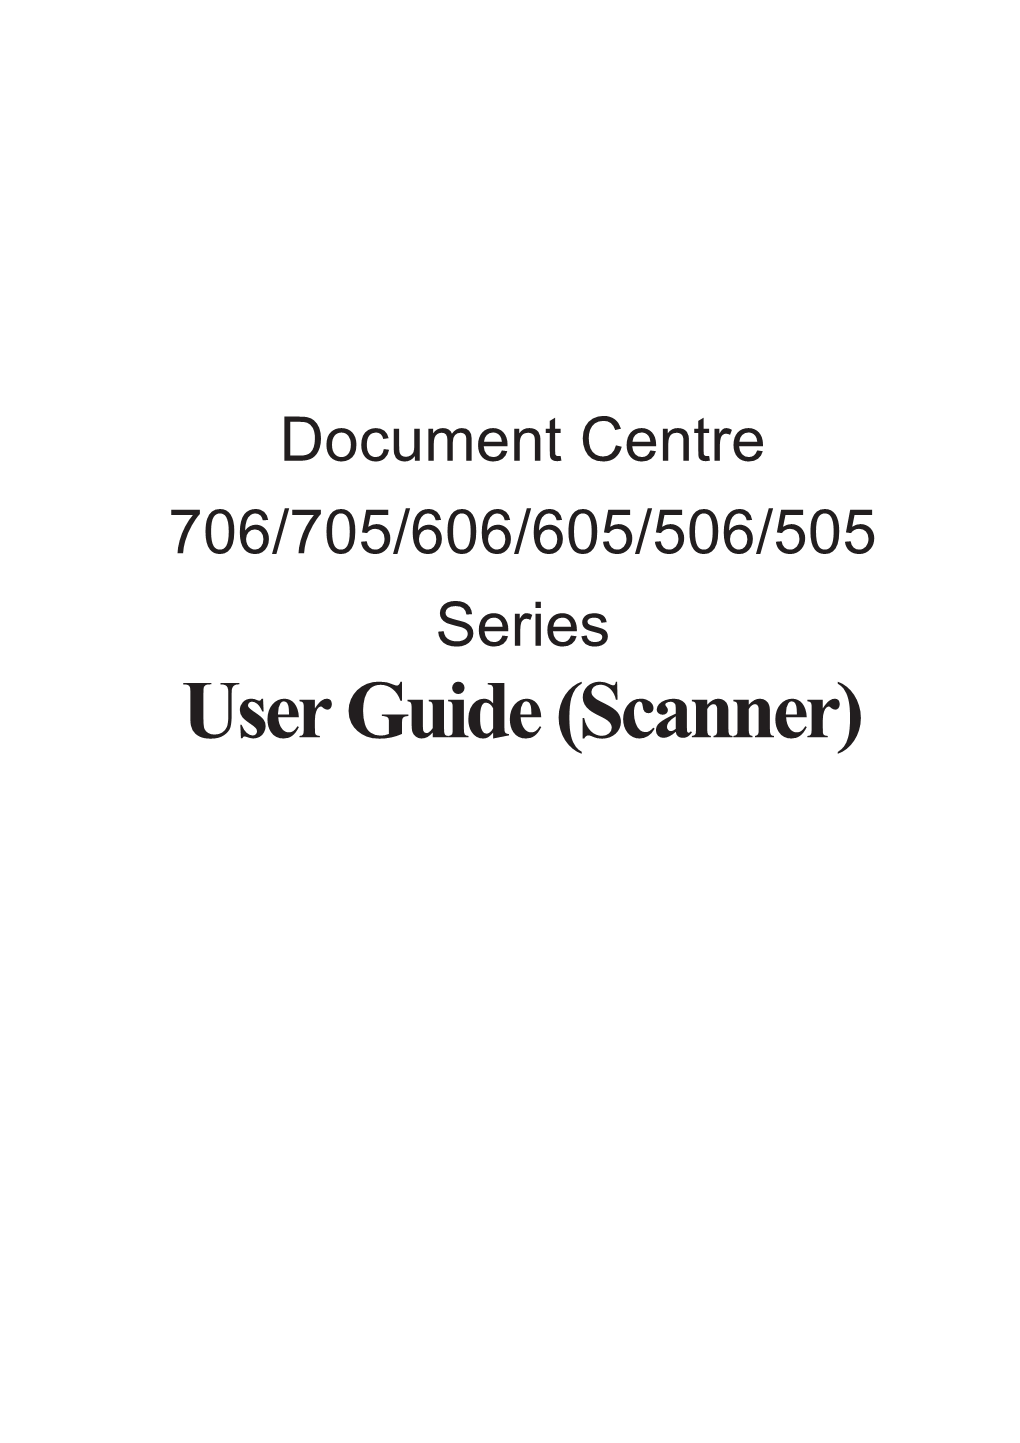 User Guide (Scanner) Adobe and Photoshop Are Trademarks of Adobe Systems Incorporated